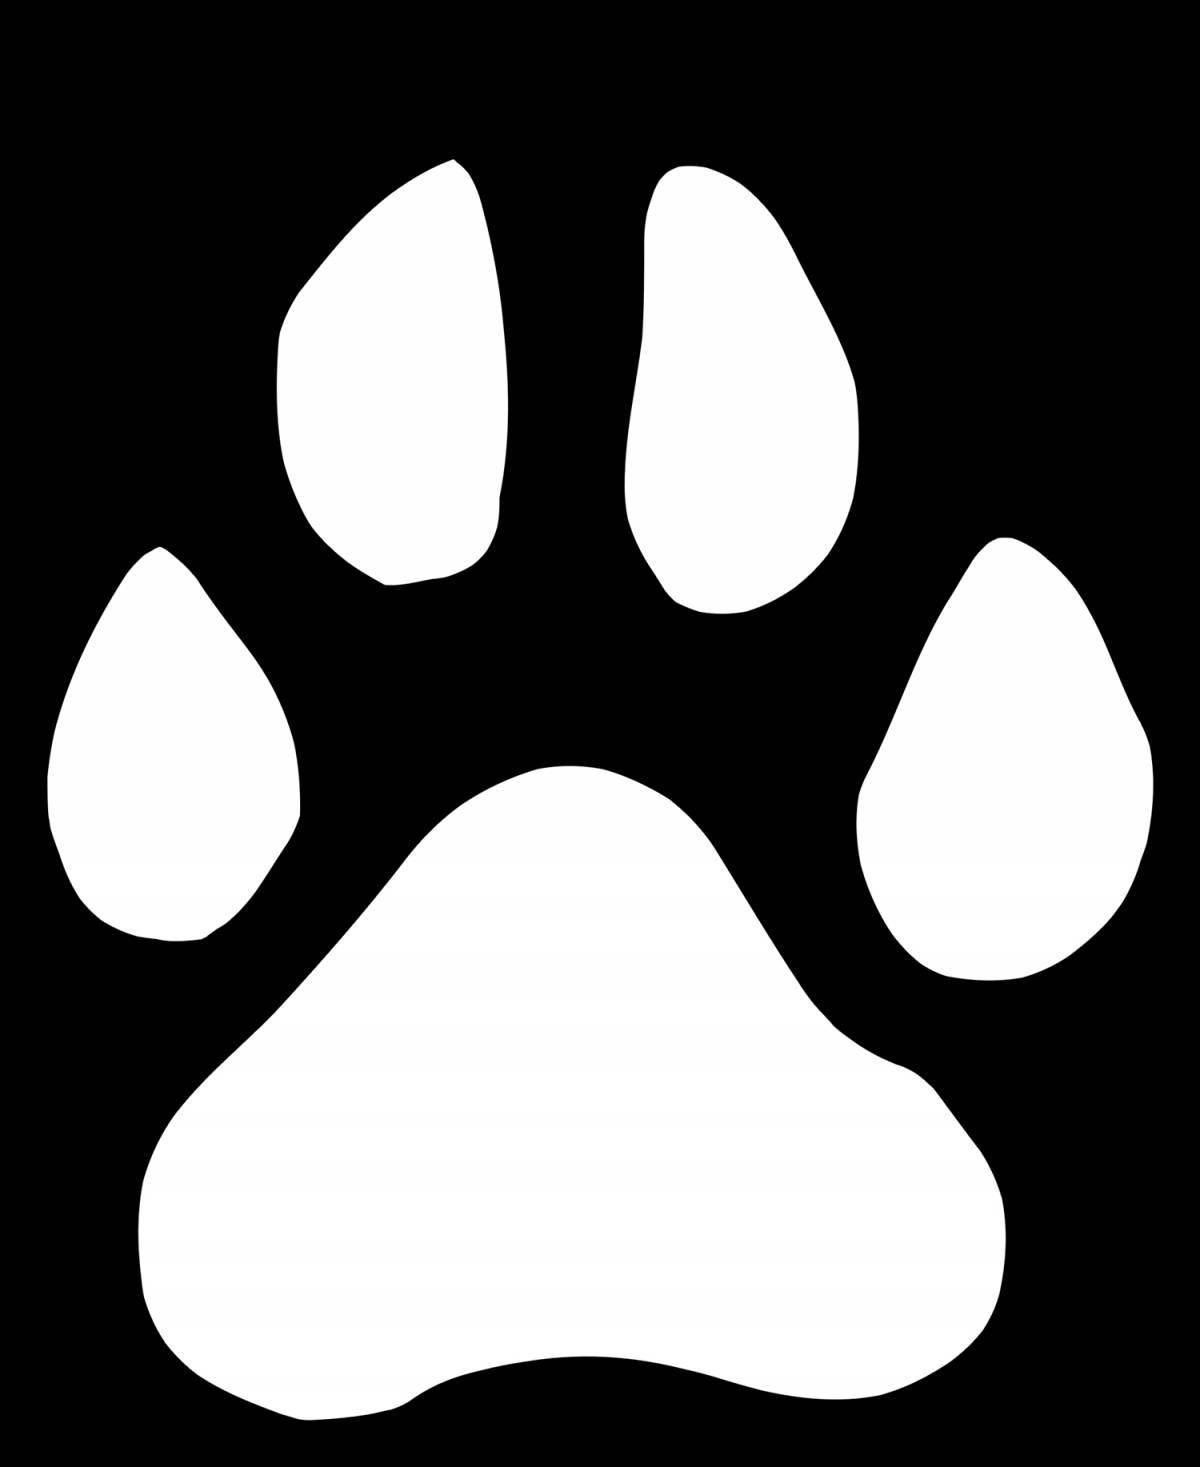 Great cat paw coloring page